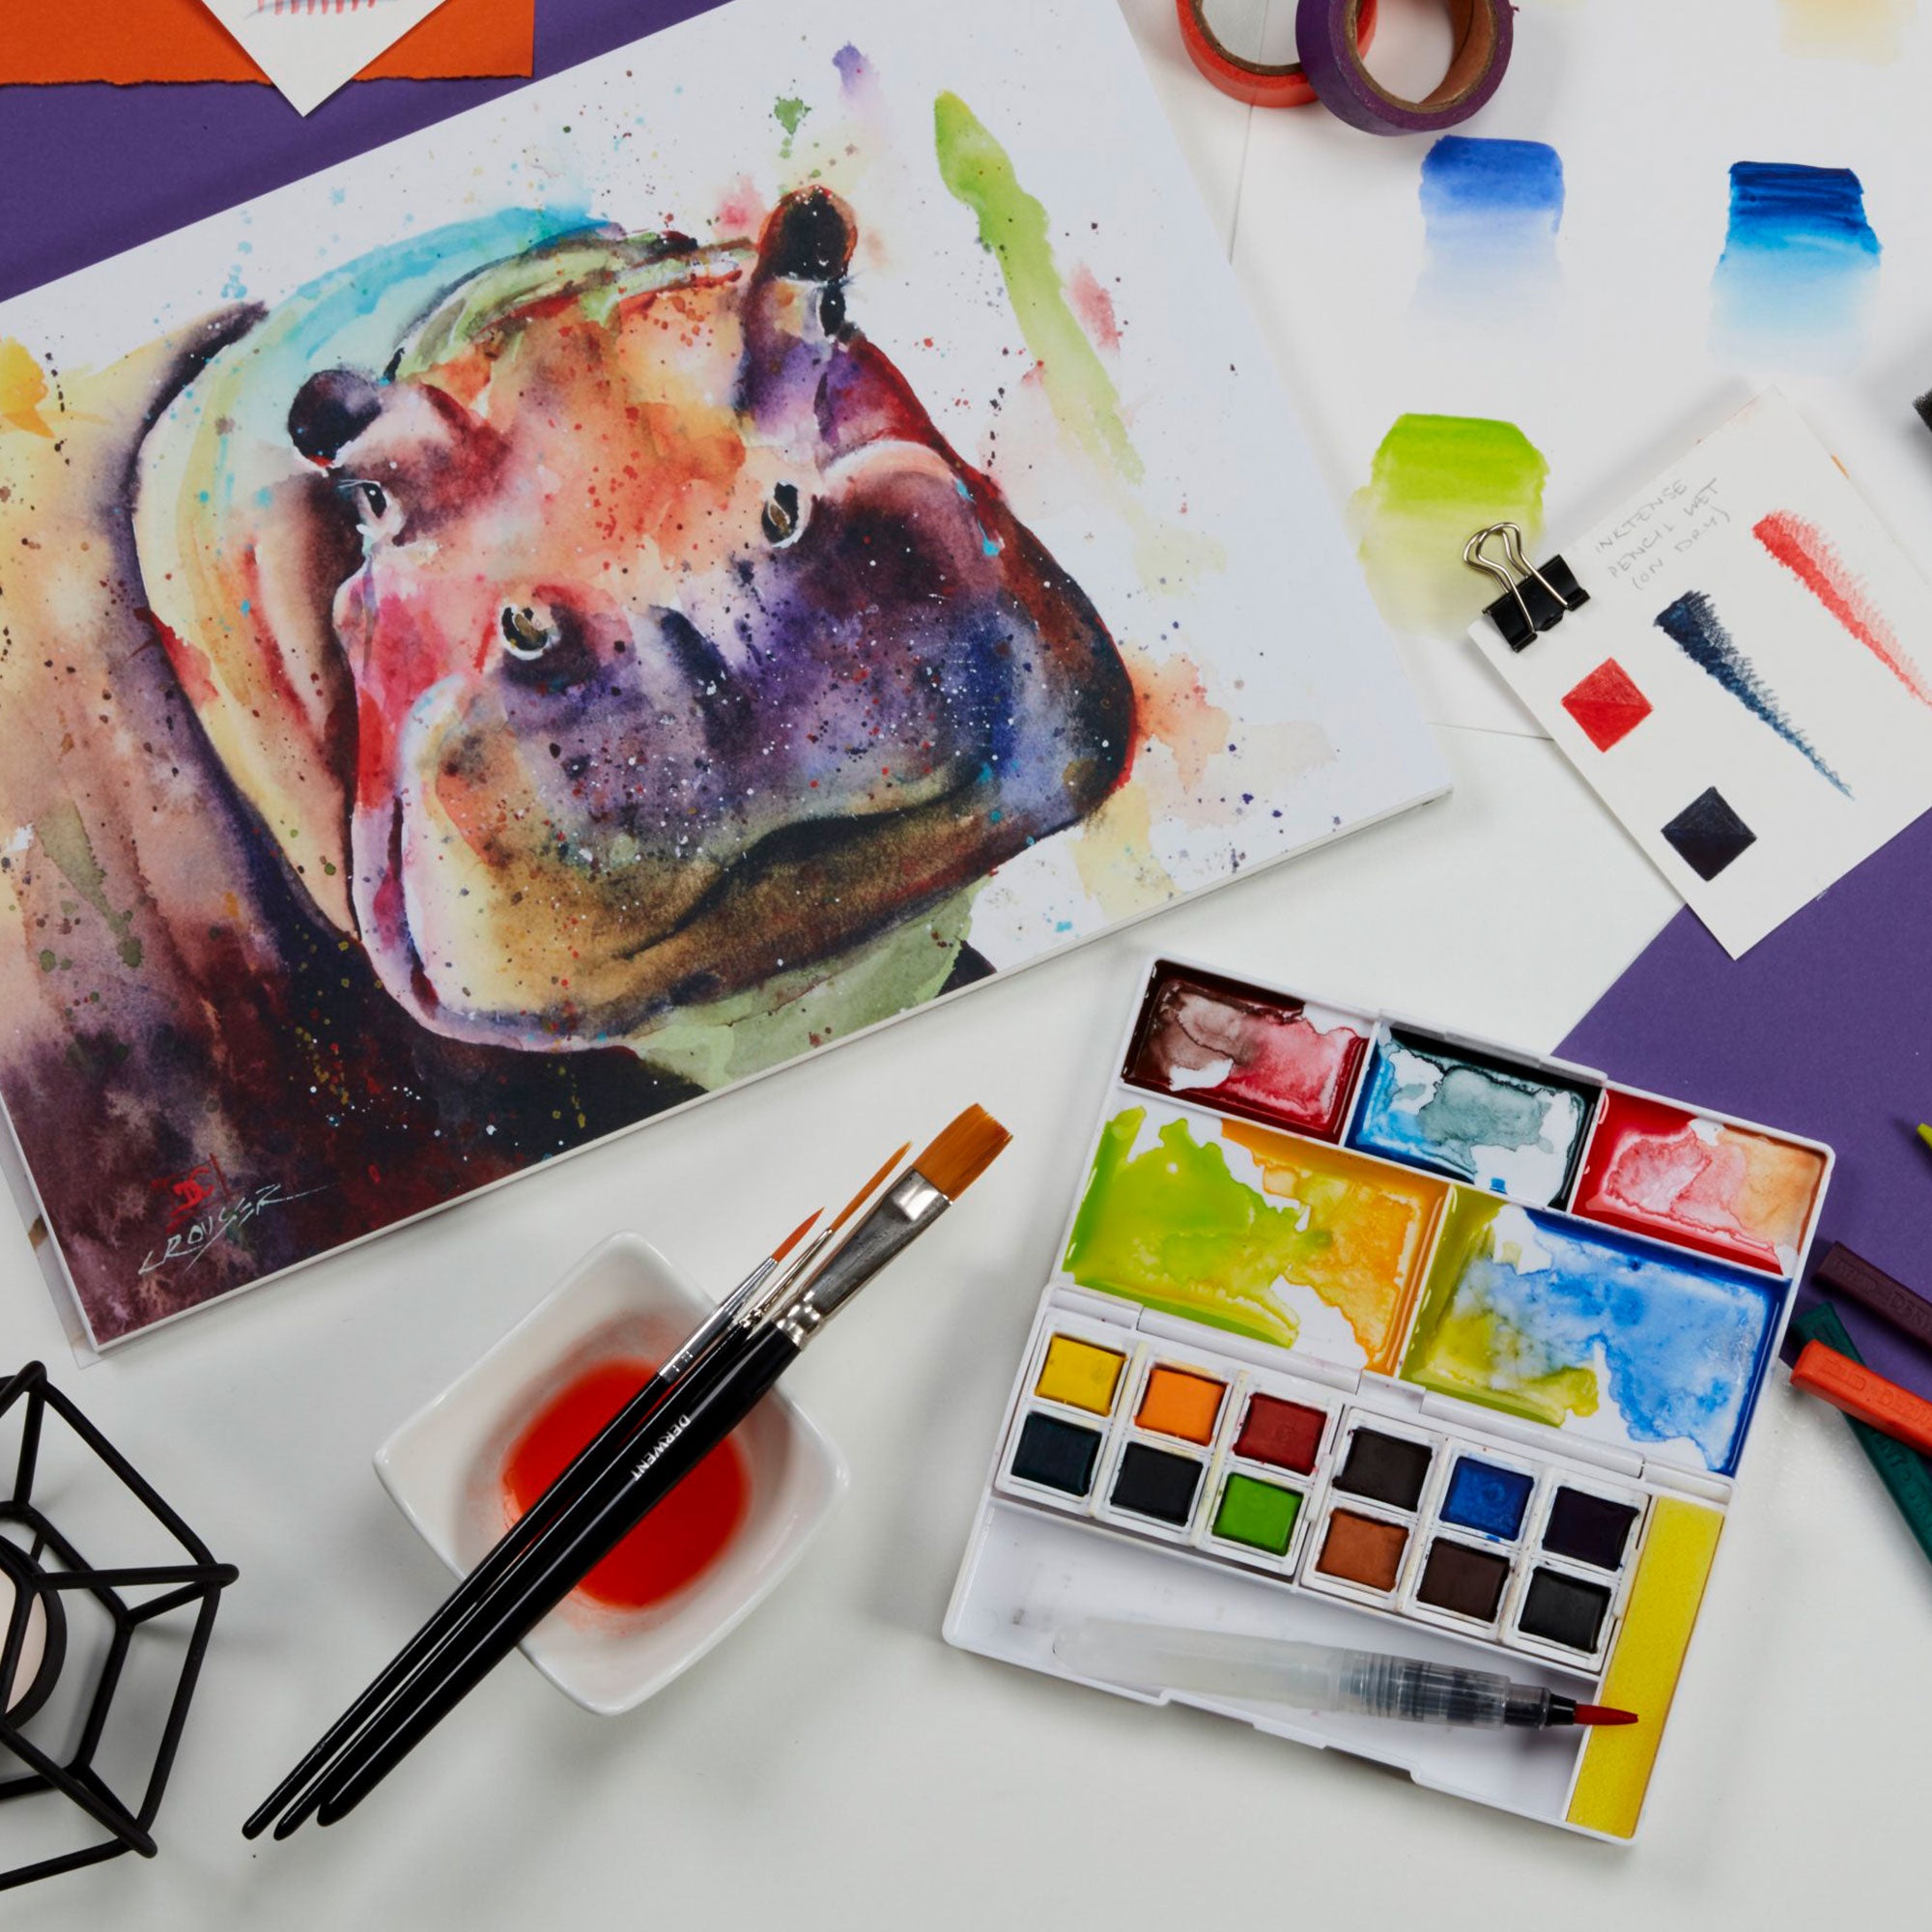 Derwent Inktense 12 Paint Pan Travel Set #1 - In situ with a colourful, vivid painting of a hippo